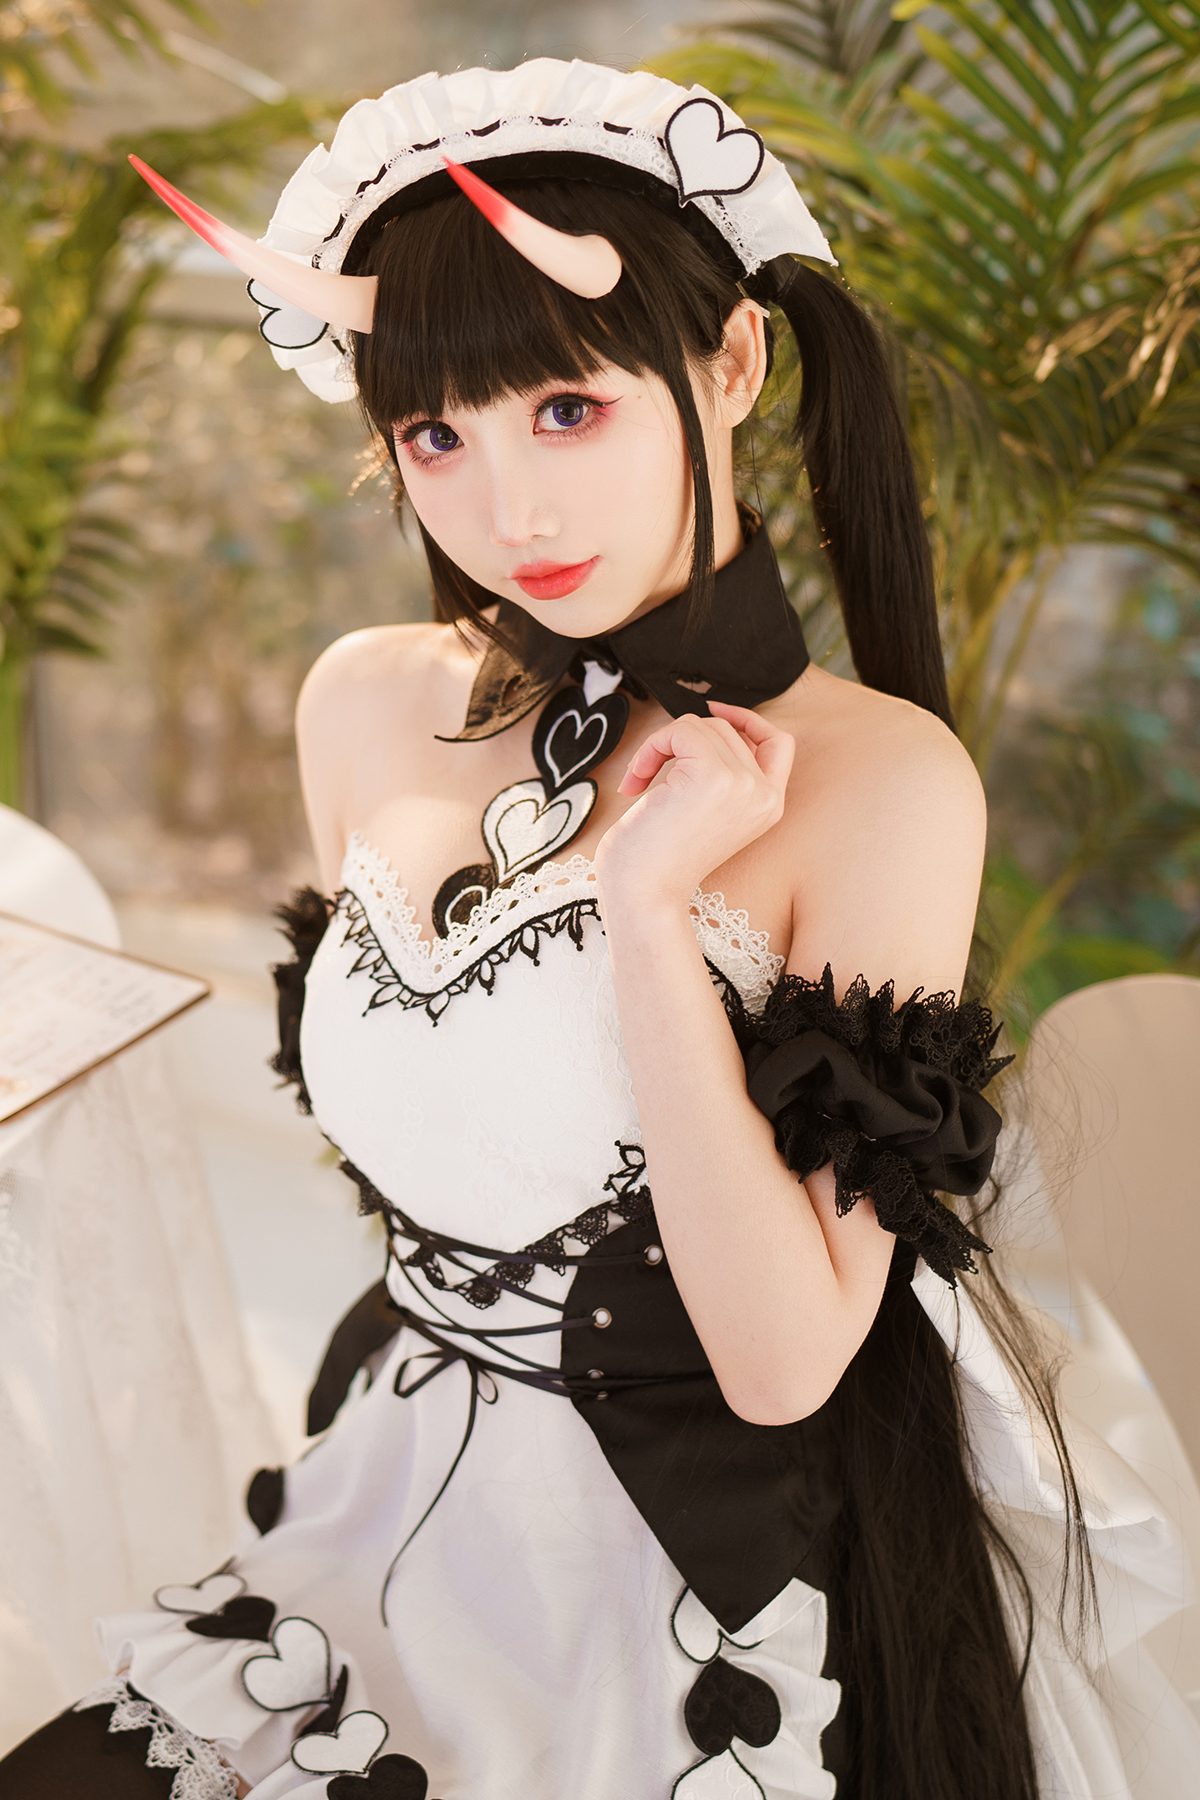 View - Coser@面饼仙儿 No.122 能代女仆 - 